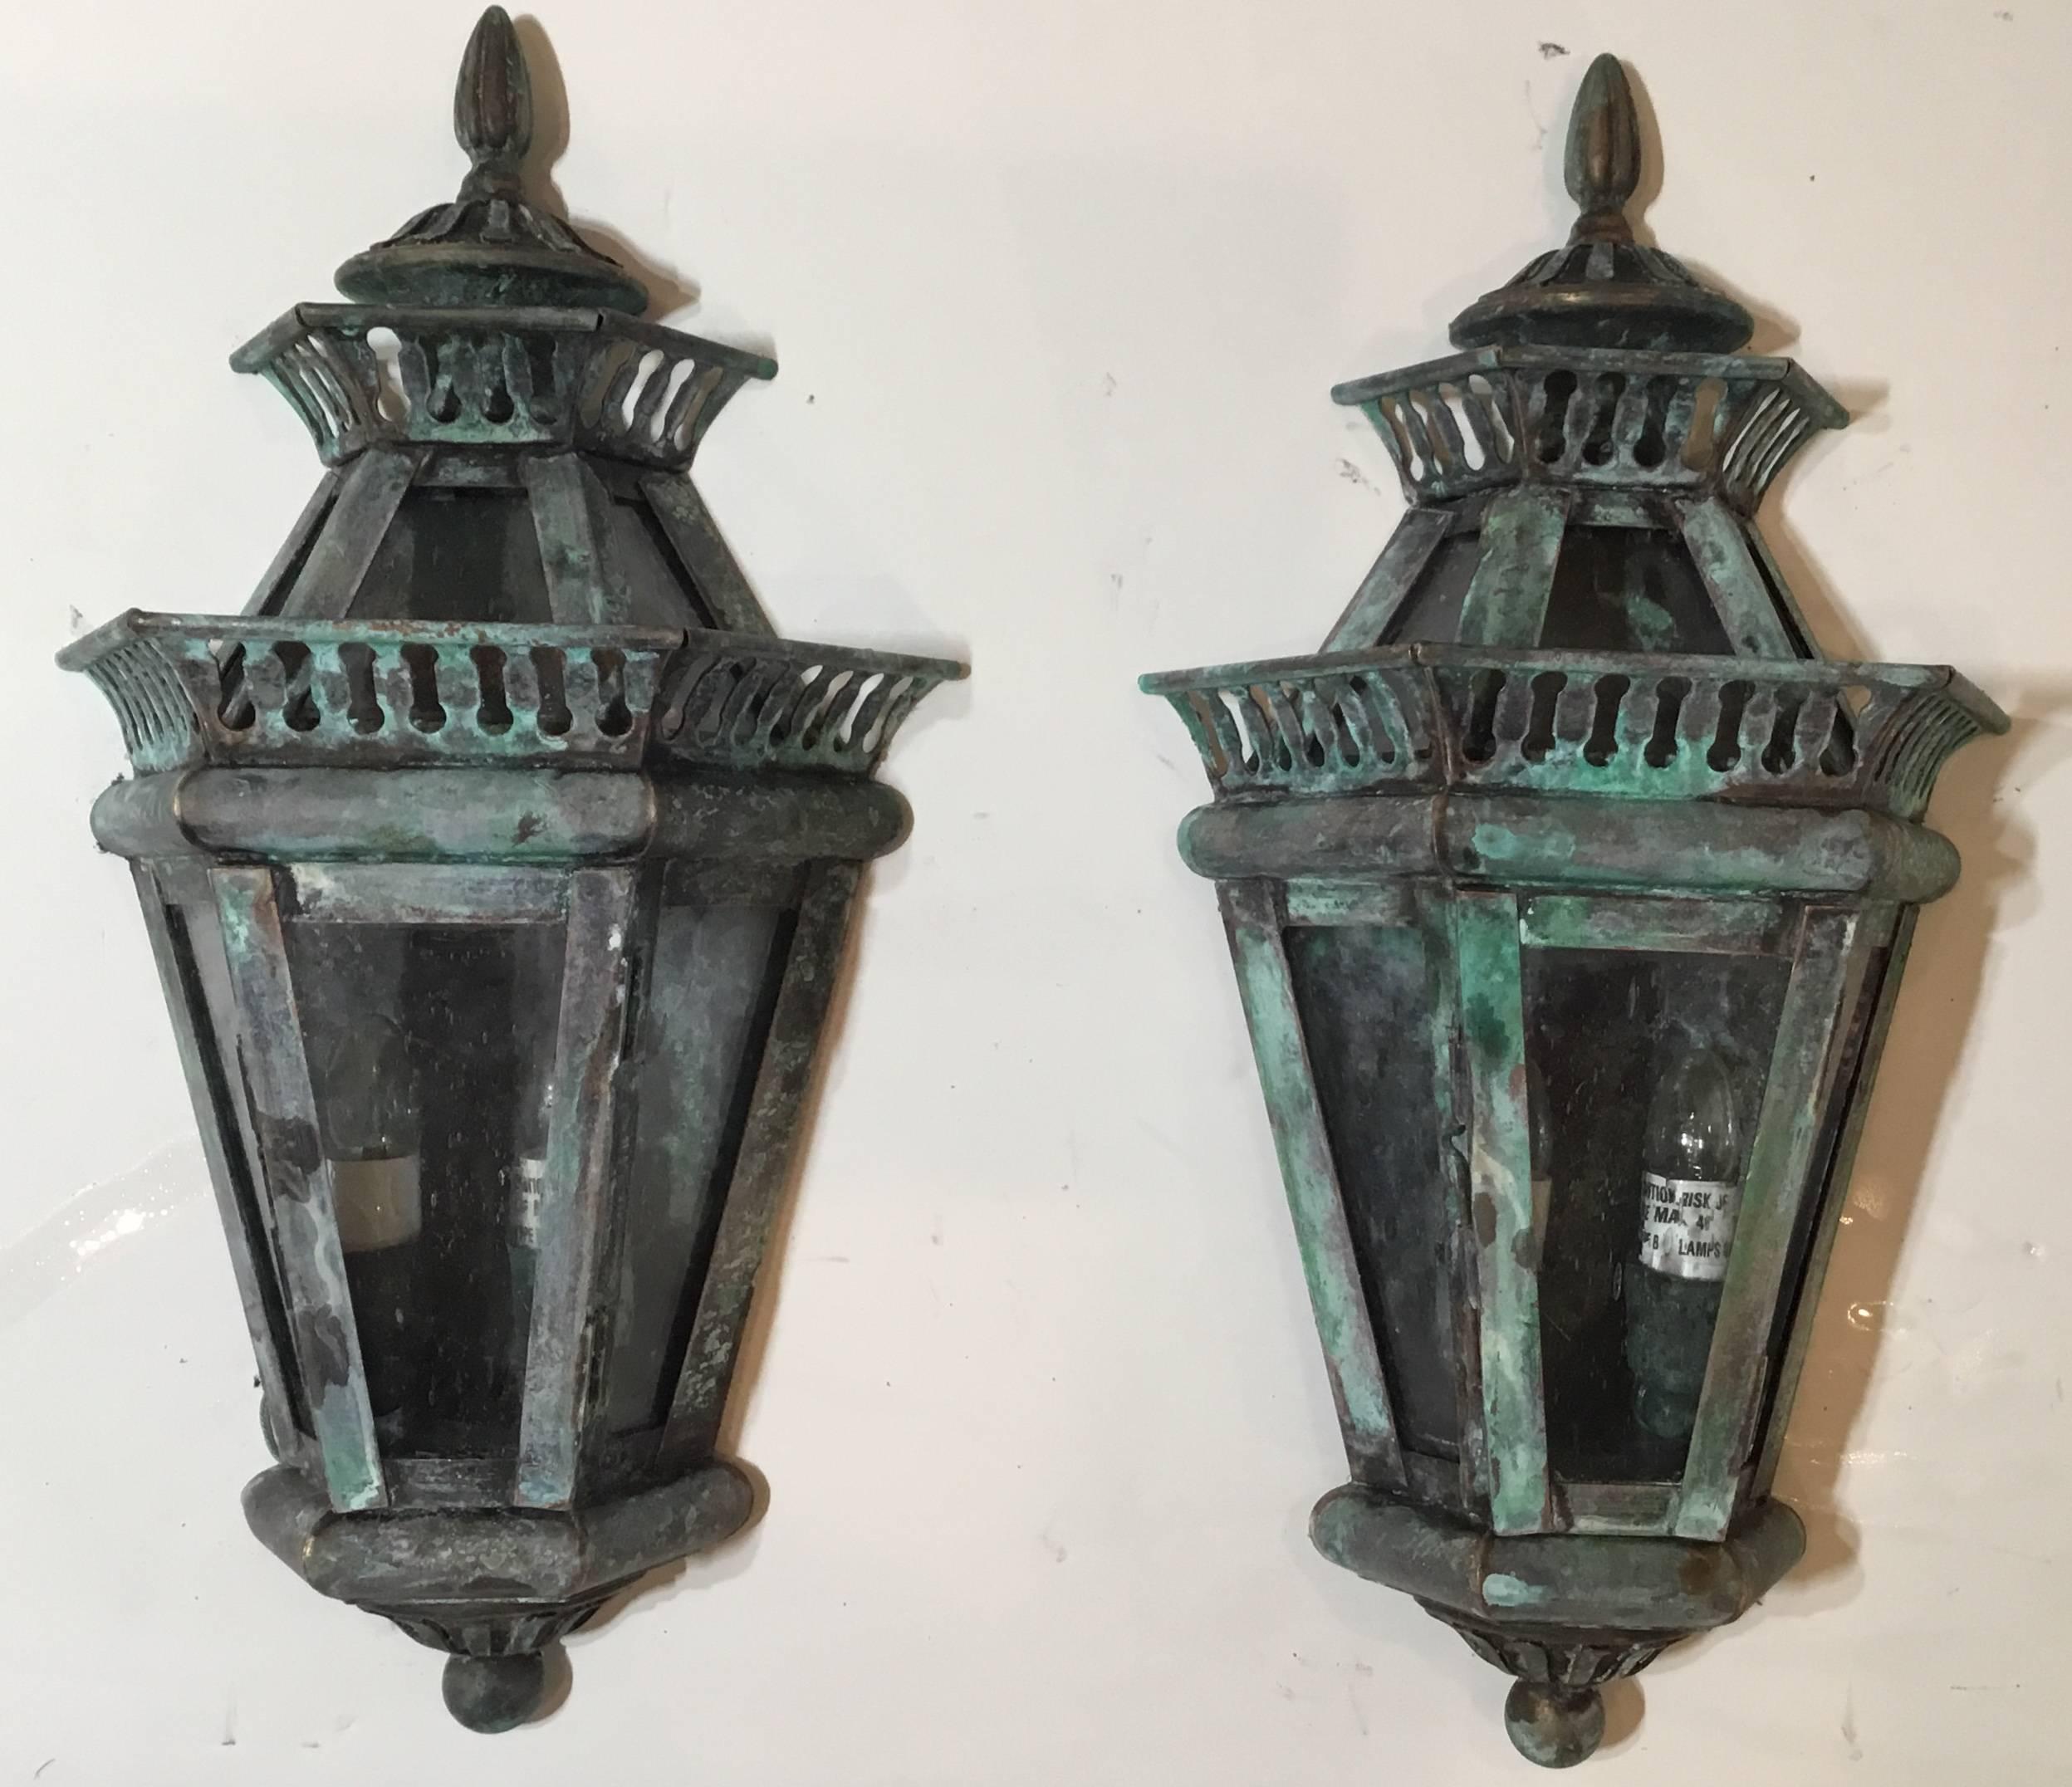 Decorative pair of lanterns handcrafted from solid brass with two 40/watt lights each, suitable for
Wet locations, up to US code UL approved.